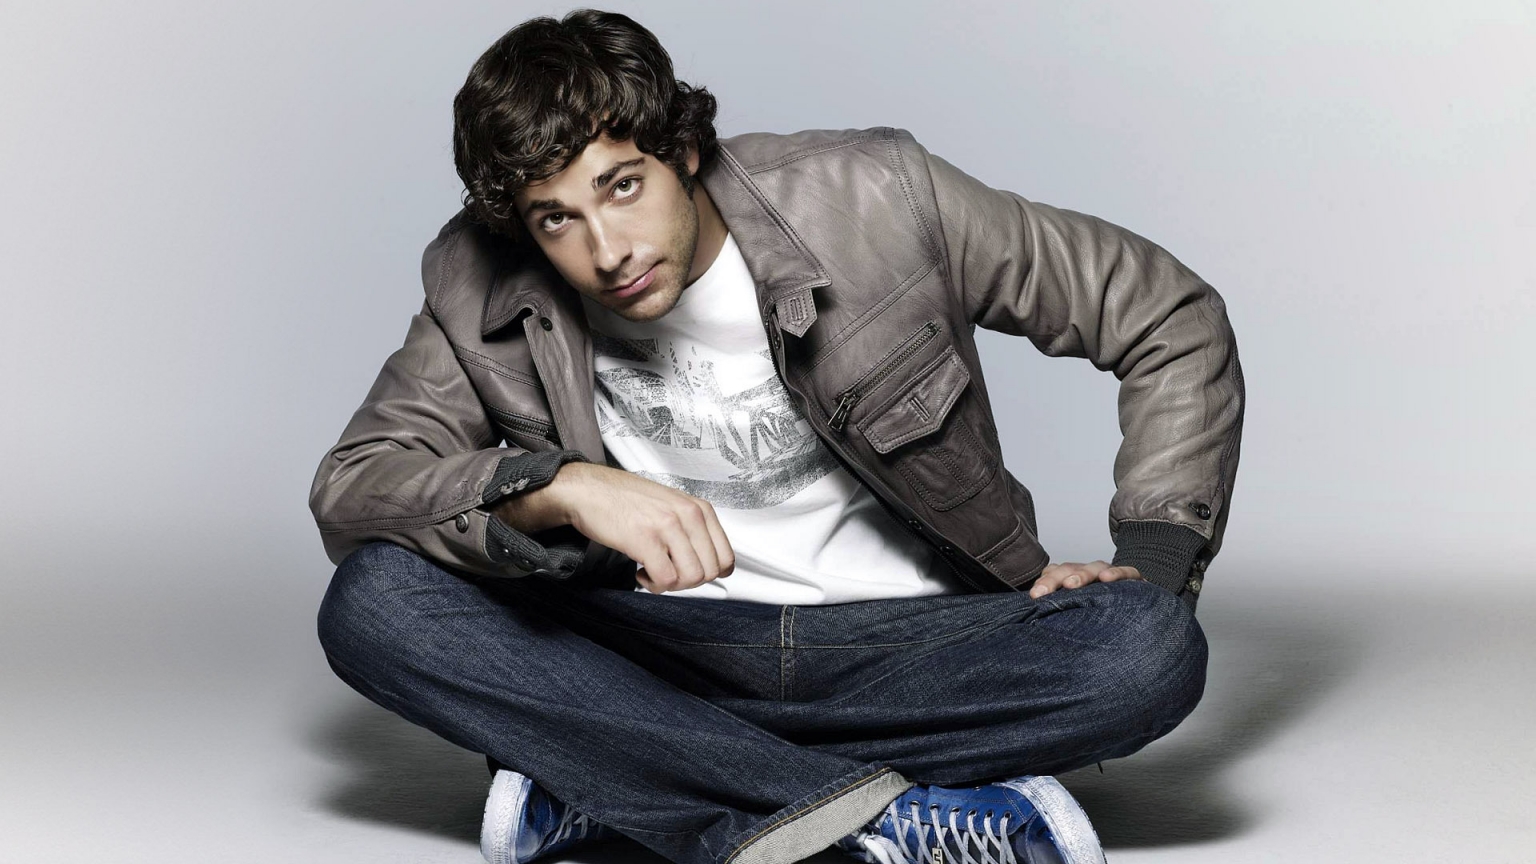 Zachary Levi Looking up for 1536 x 864 HDTV resolution